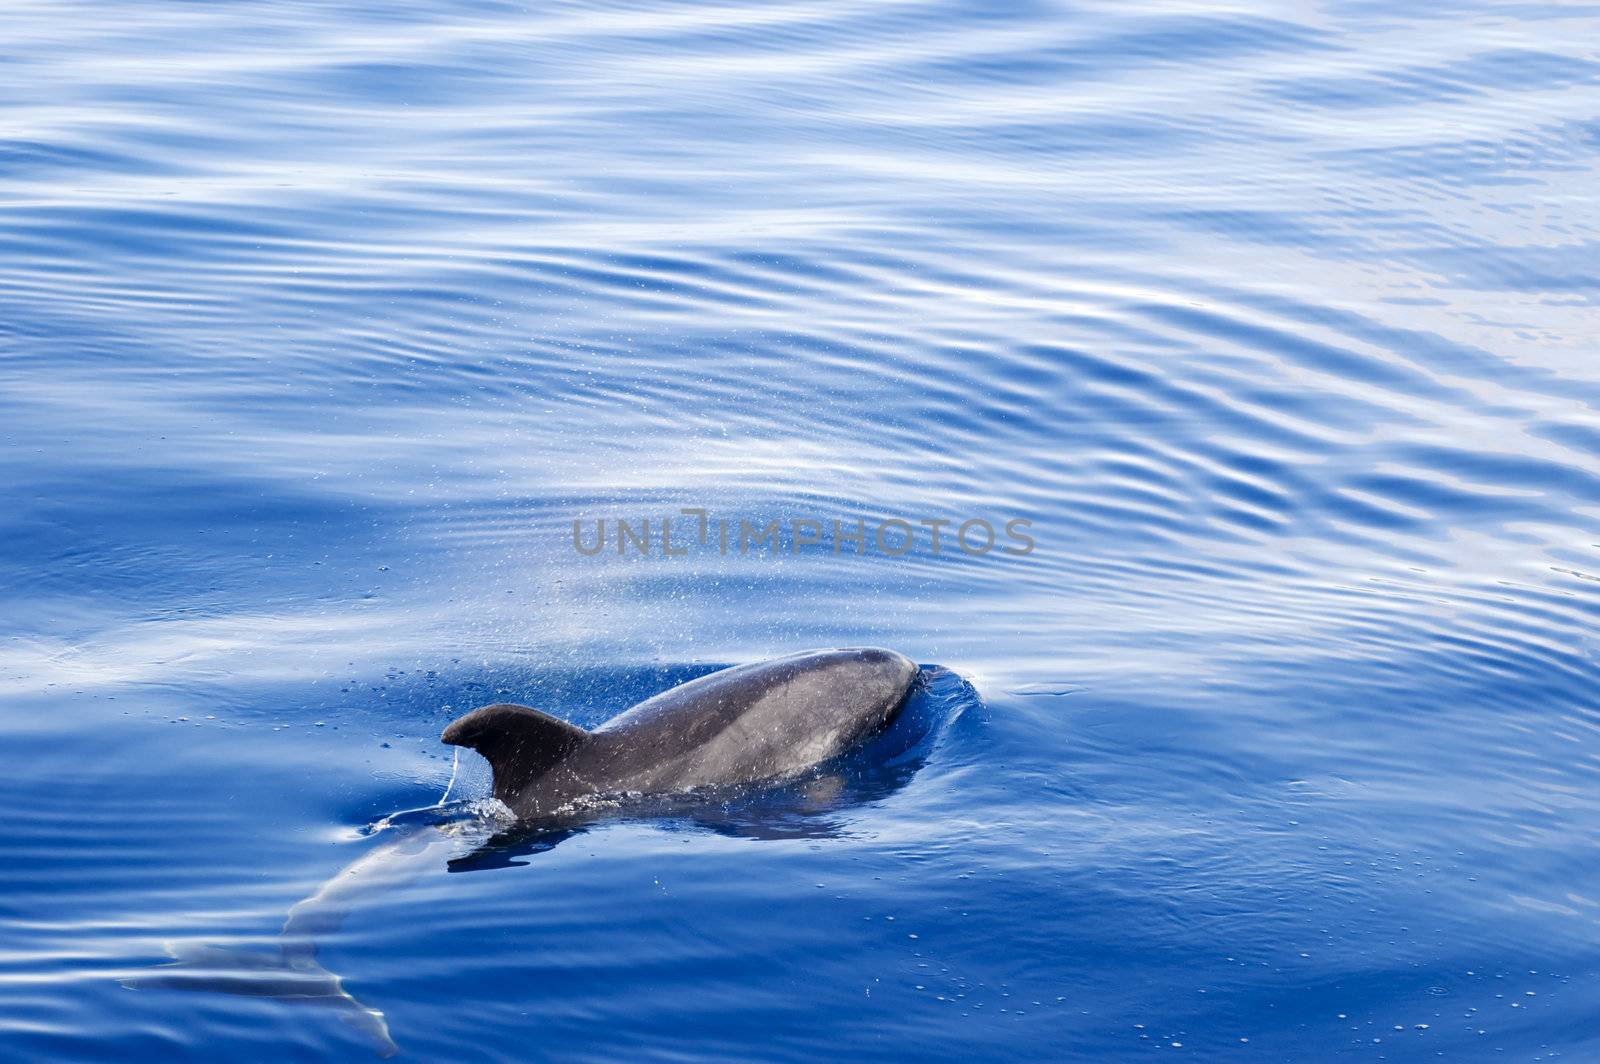 Dolphin on ocean surface by mrfotos